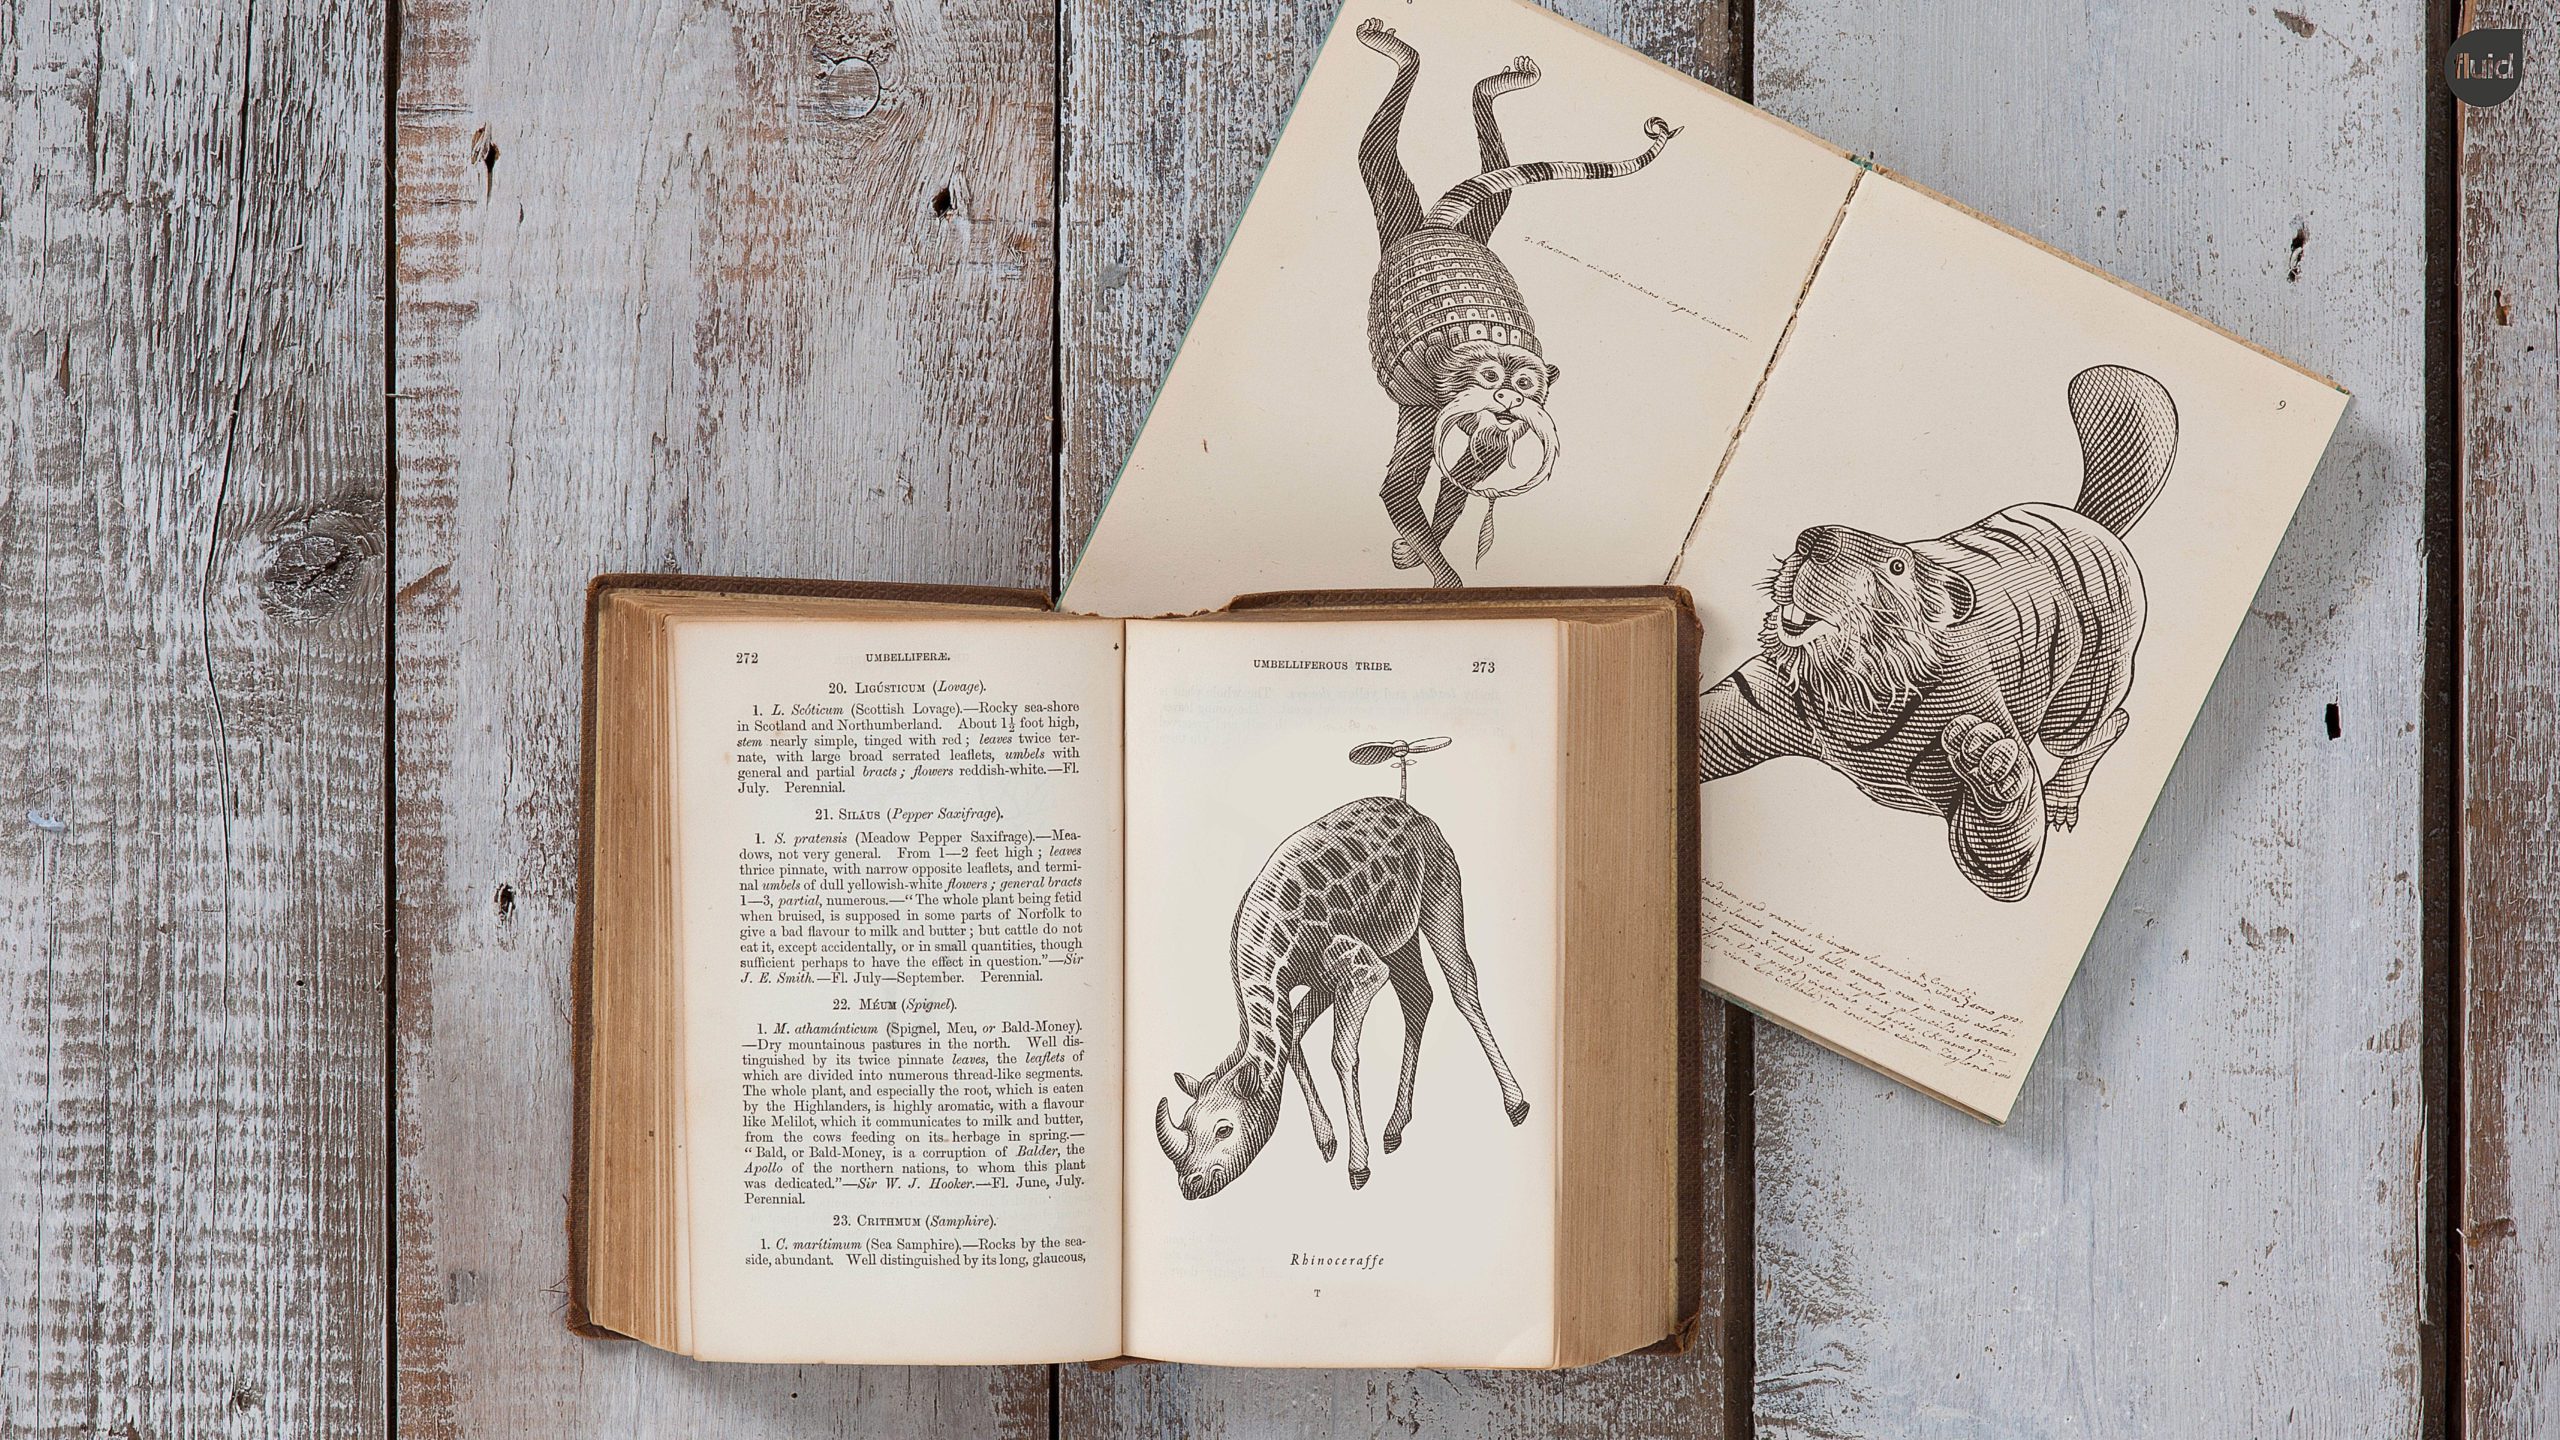 Vintage books open to illustrations of exotic make-believe animals.